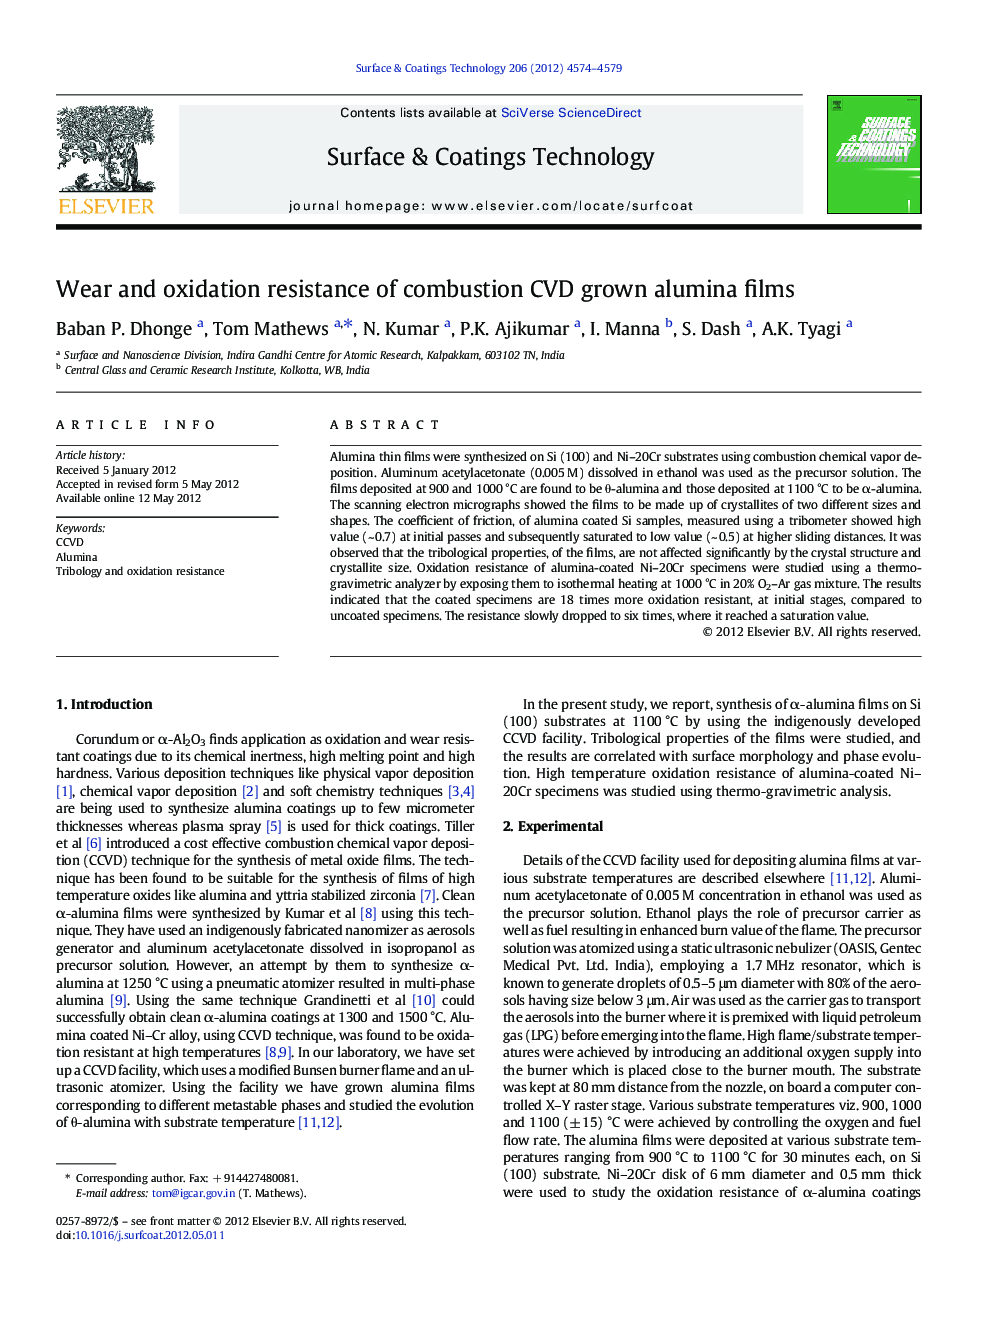 Wear and oxidation resistance of combustion CVD grown alumina films